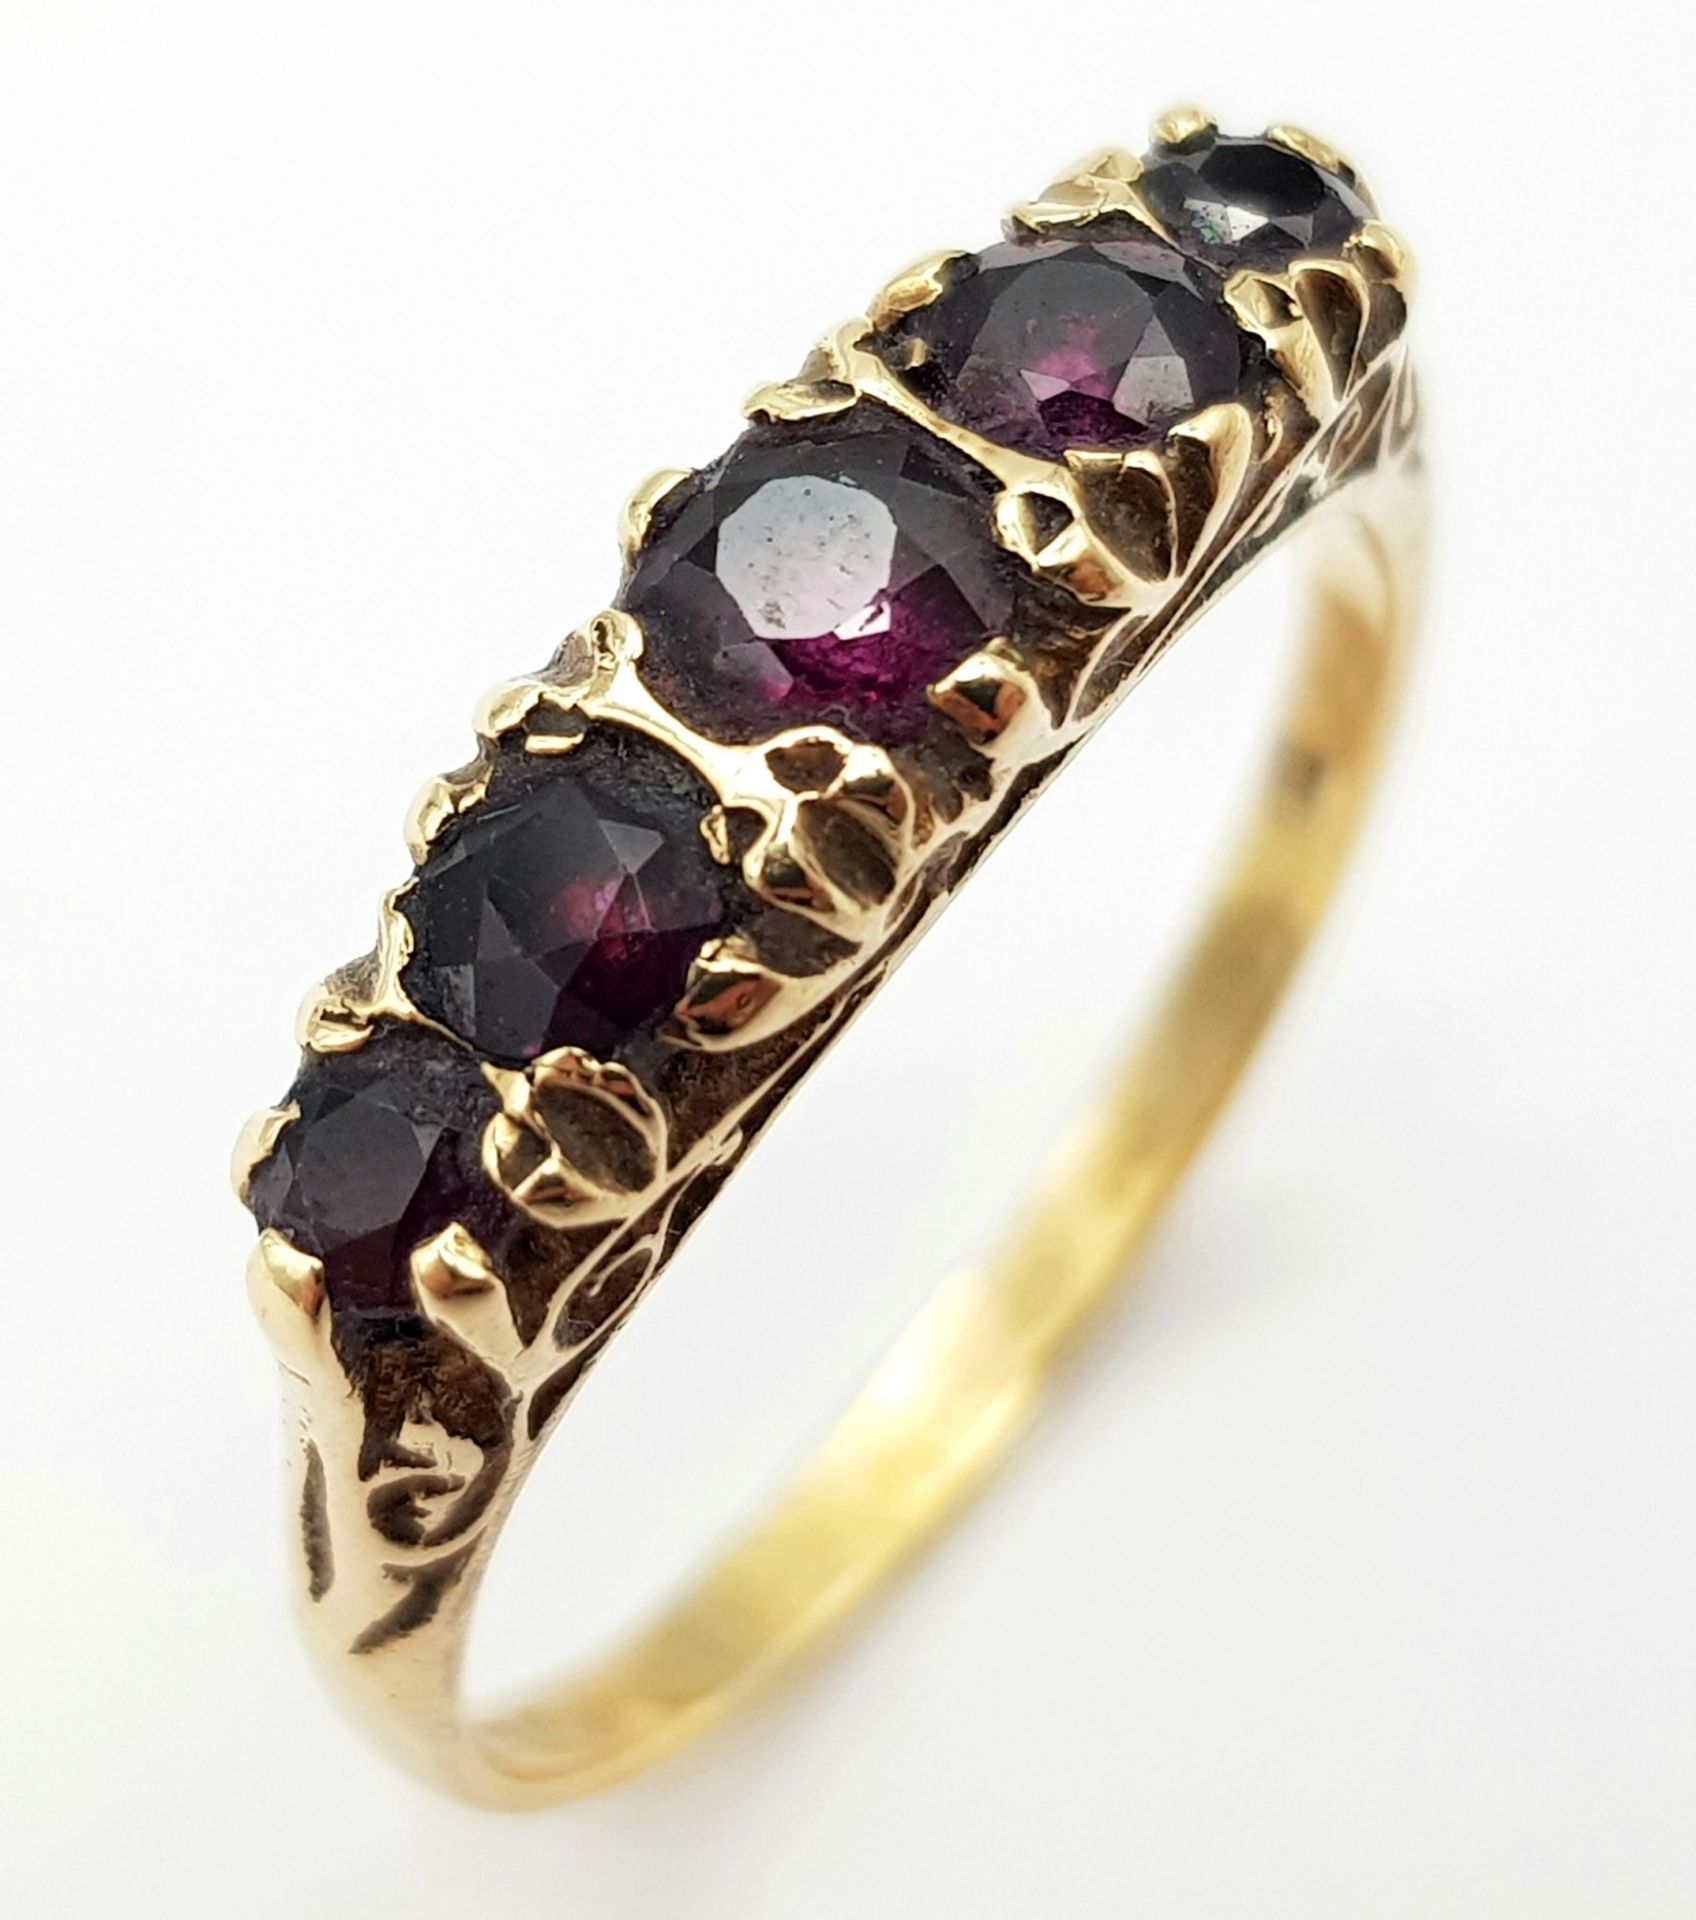 A Vintage 9K Yellow Gold Five Stone Garnet Ring. Size R. 2.8g total weight.